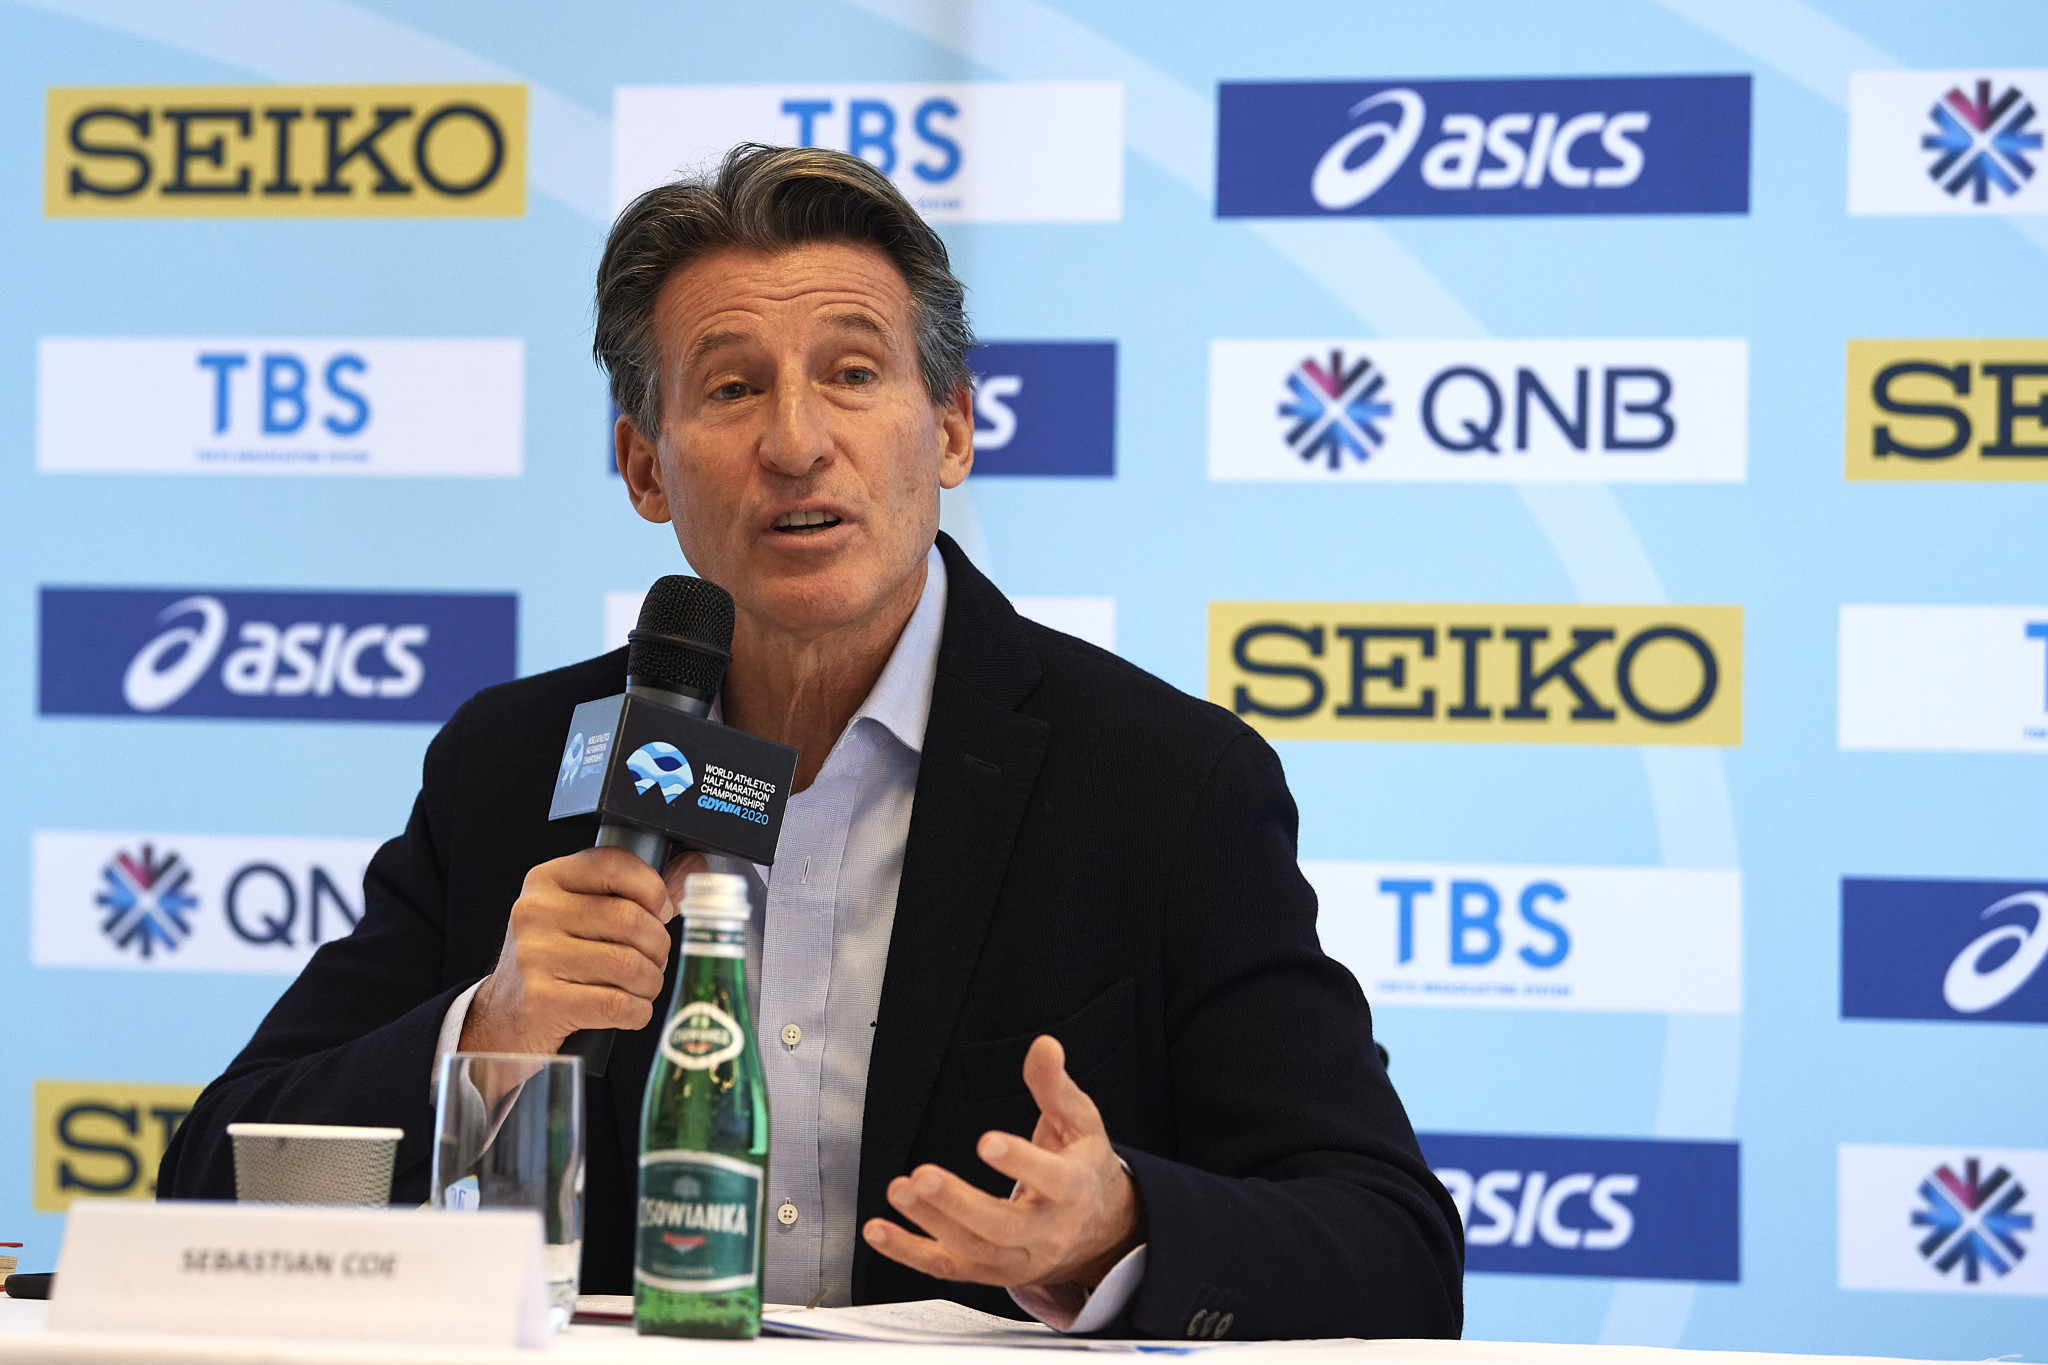 Sebastian Coe claimed curbing the development of high-tech footwear would "suffocate innovation" ©Getty Images